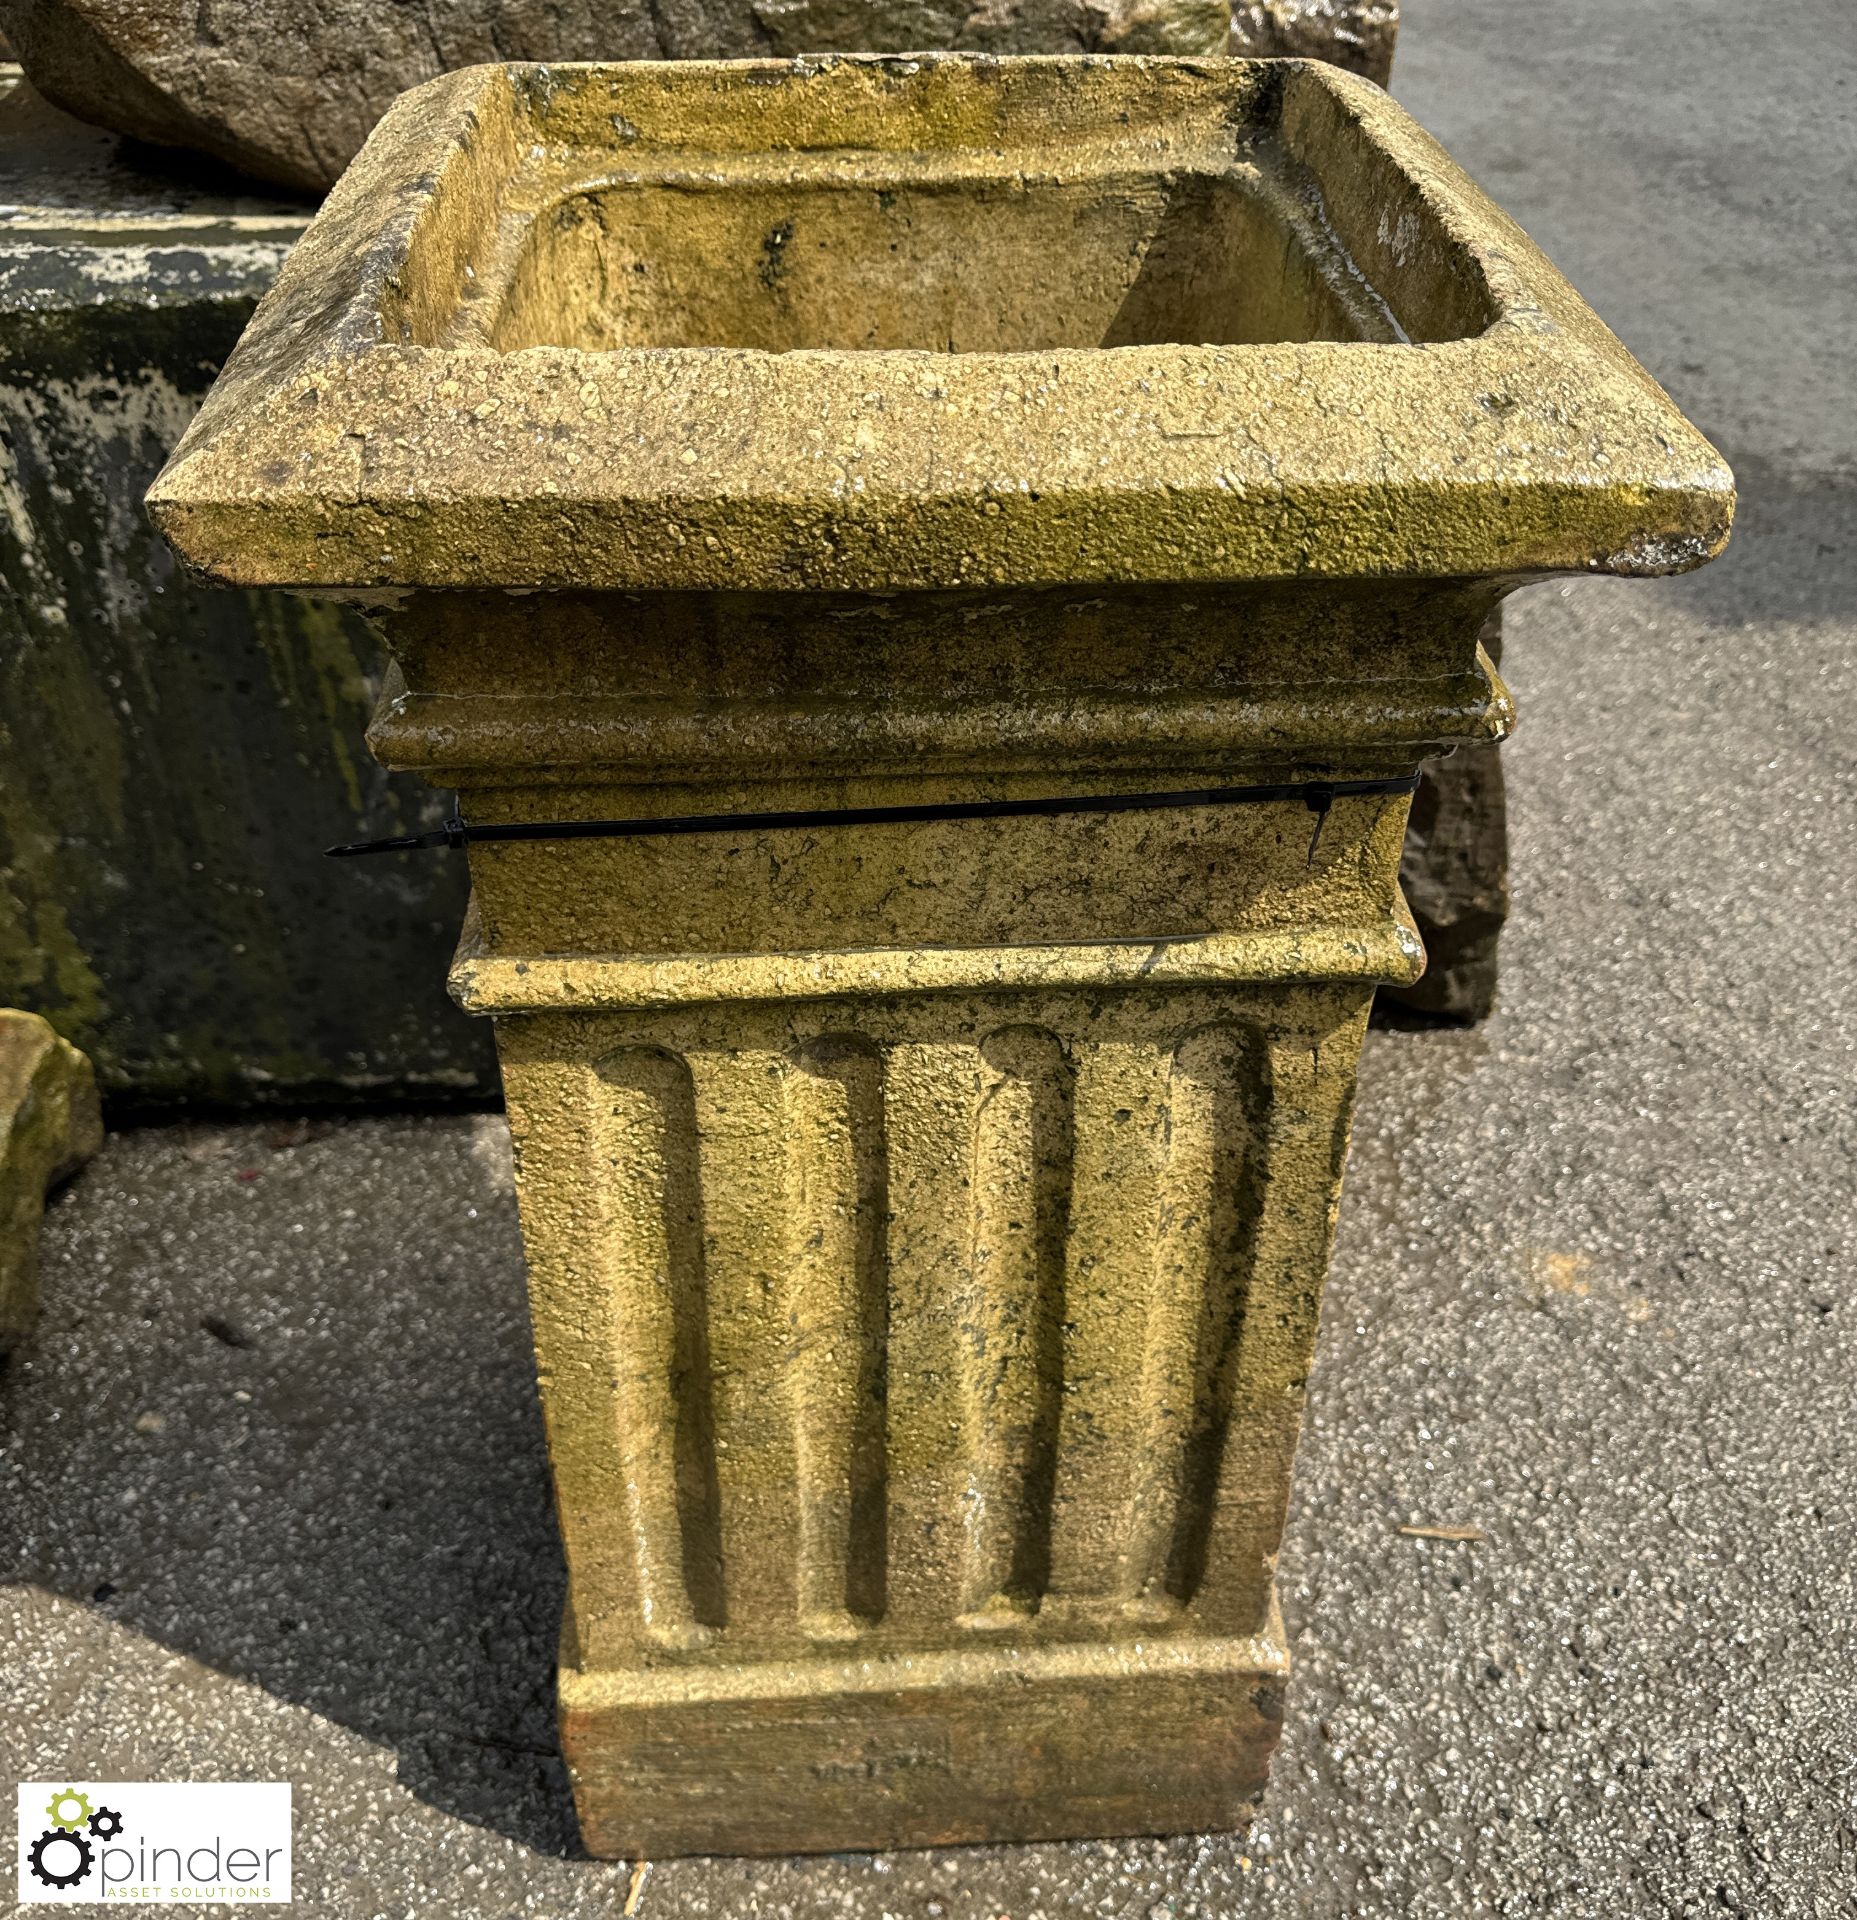 An Edwardian buff terracotta Chimney Pot, with fluted decorations, approx. 30in x 16in x 16in - Image 3 of 5